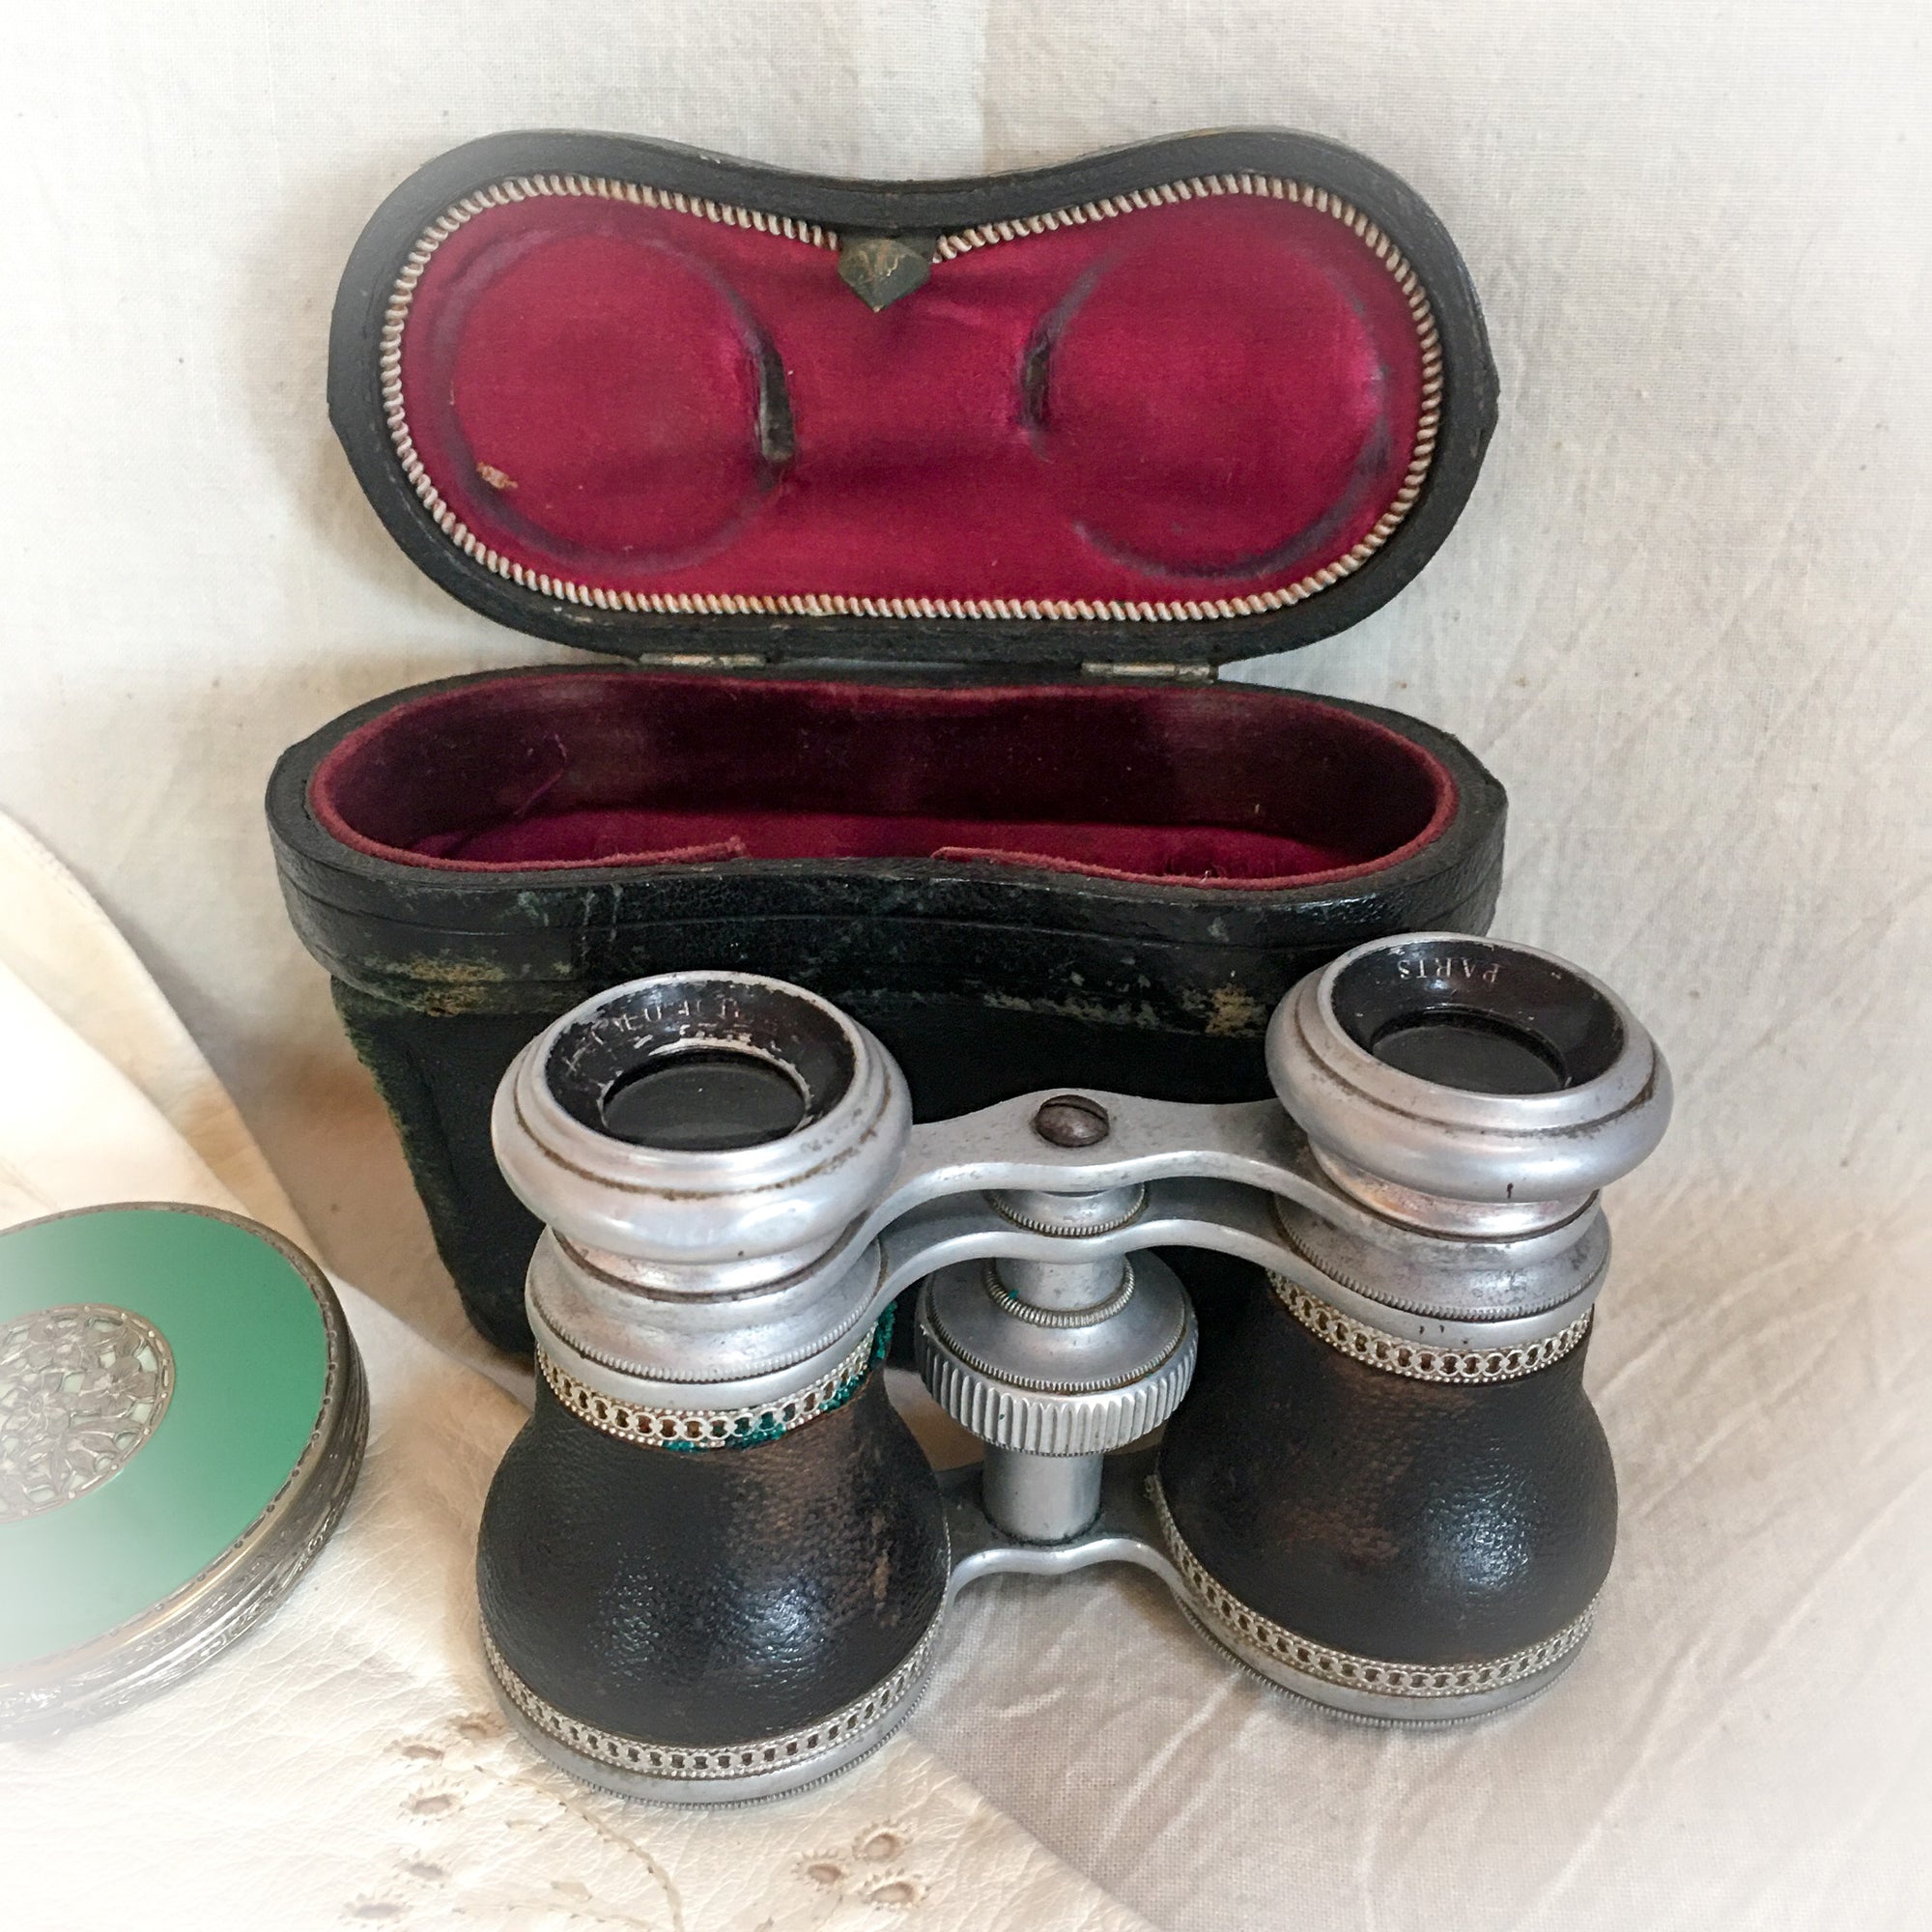 Early 1900’s Lamour Paris Opera Glasses with Silk Lined Leather Case